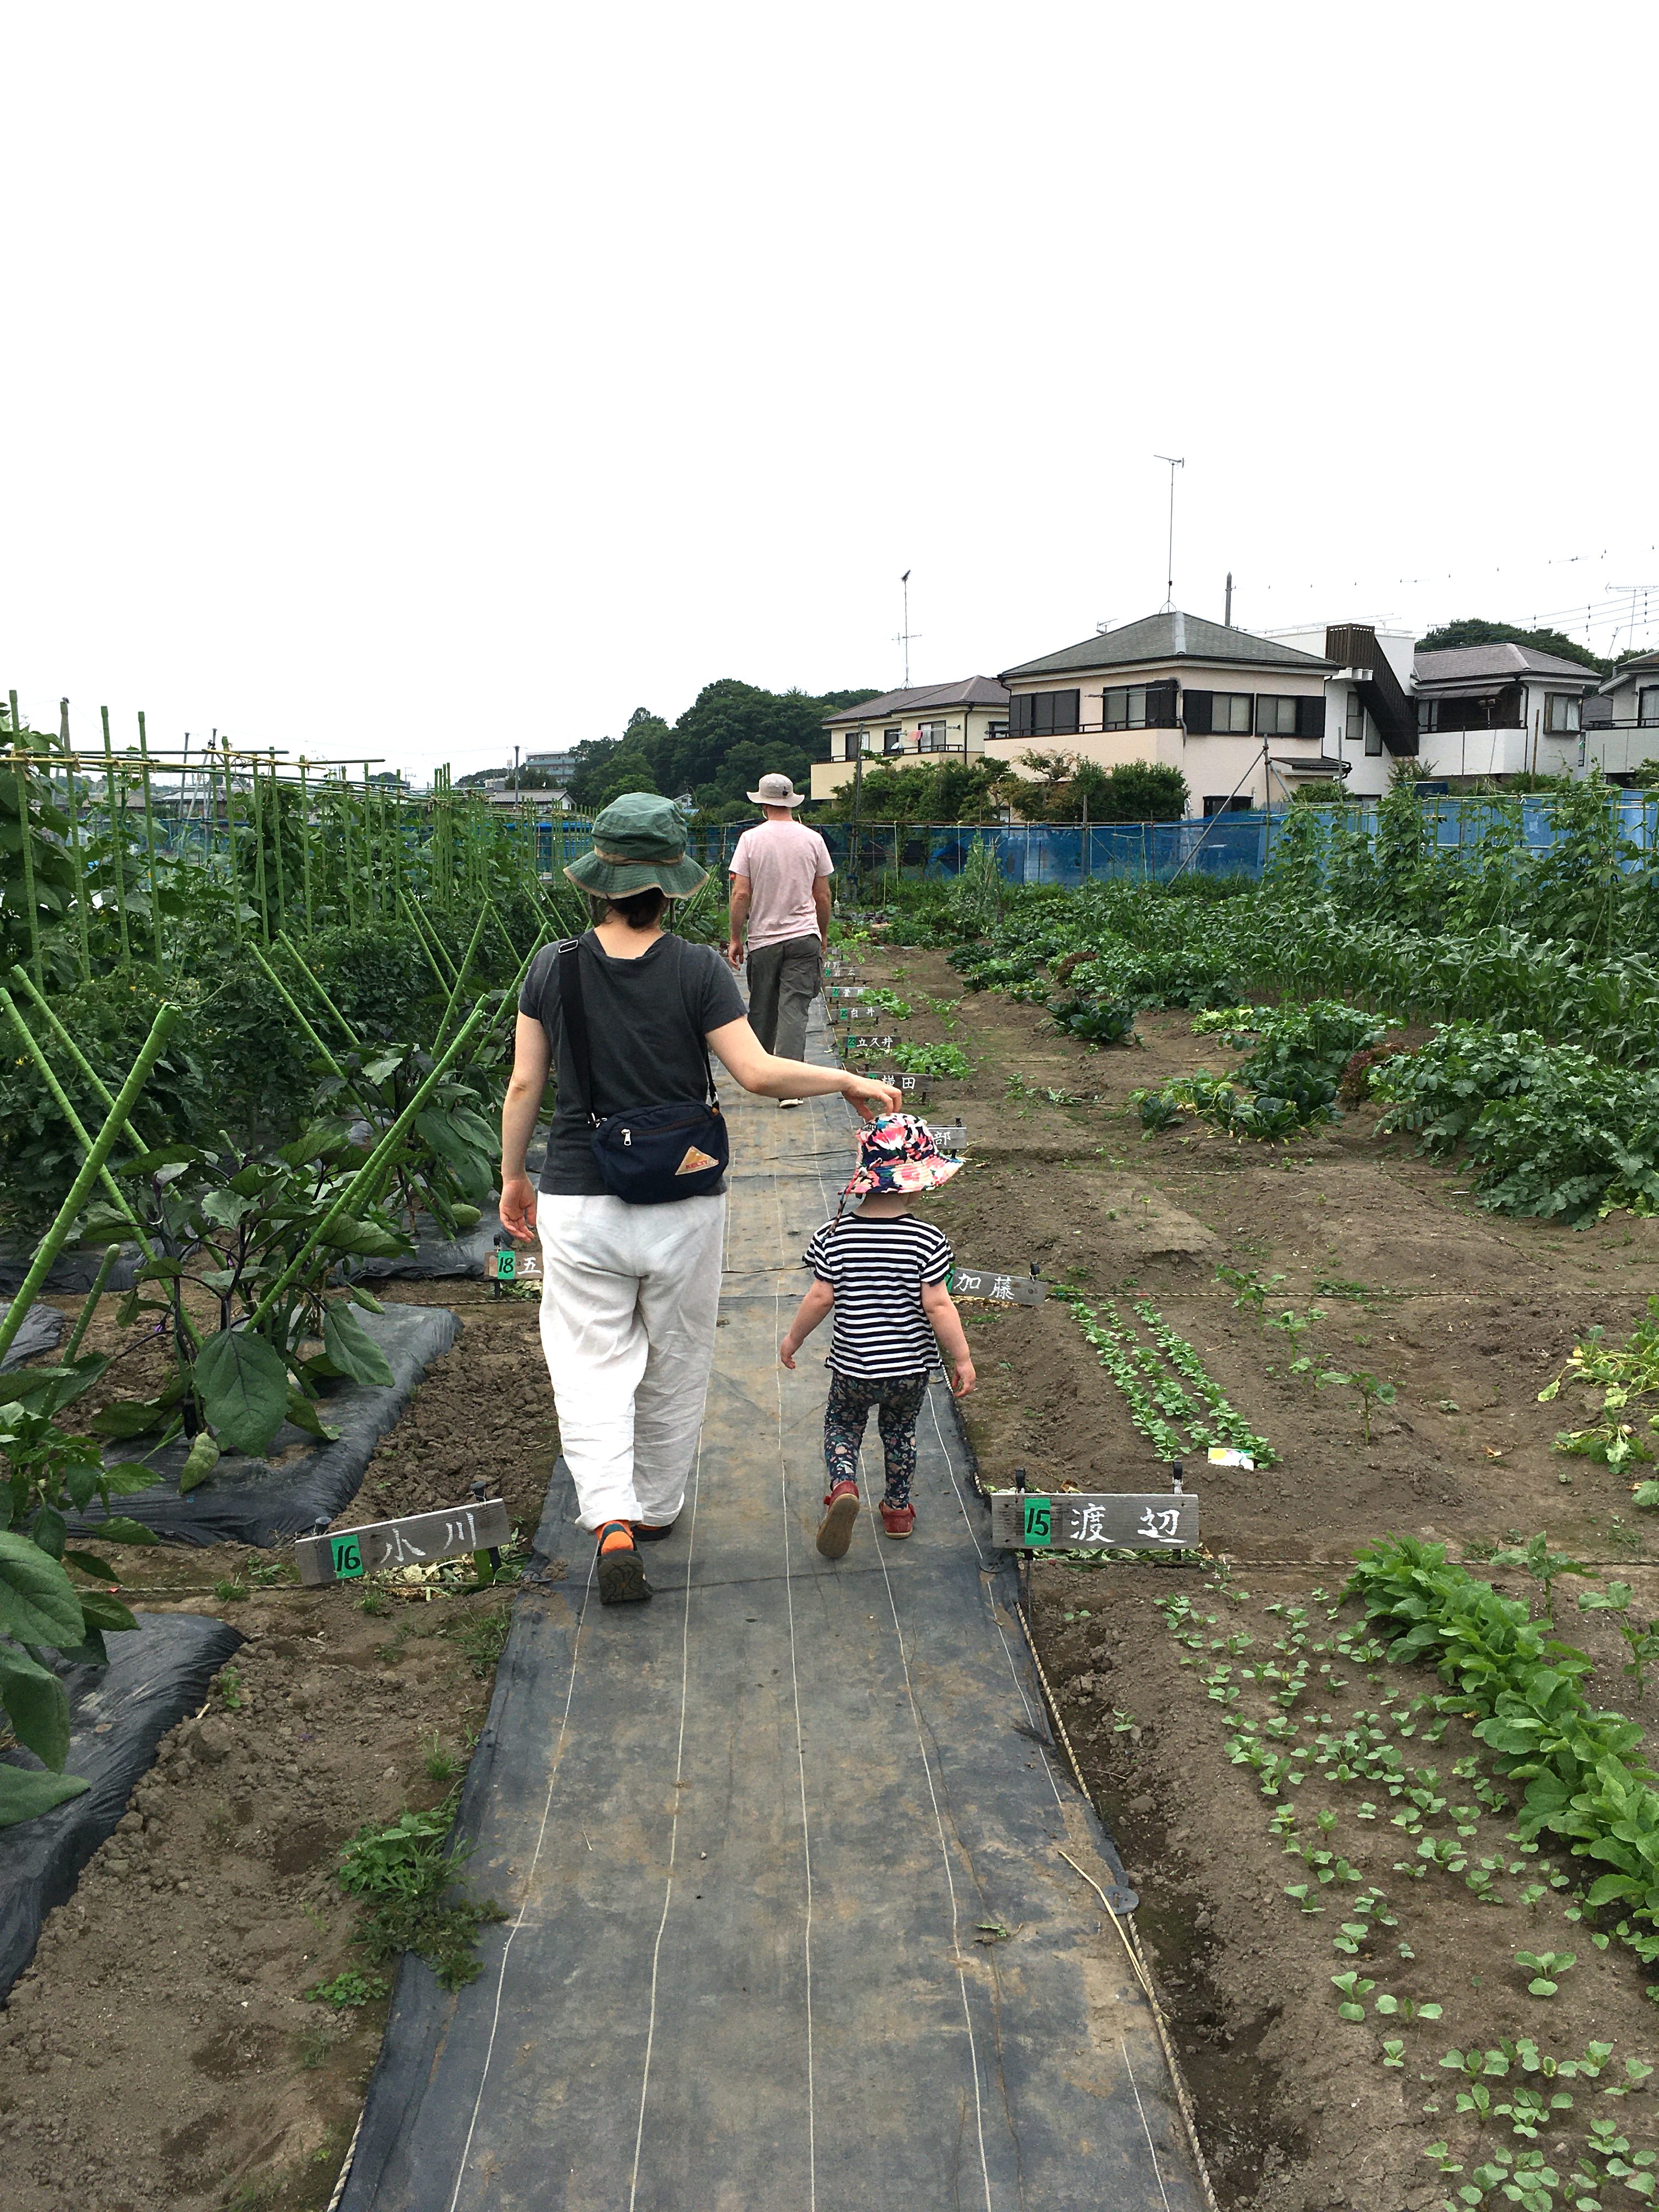 Here’s How To Join A Community Garden In Tokyo - People walking in a community garden